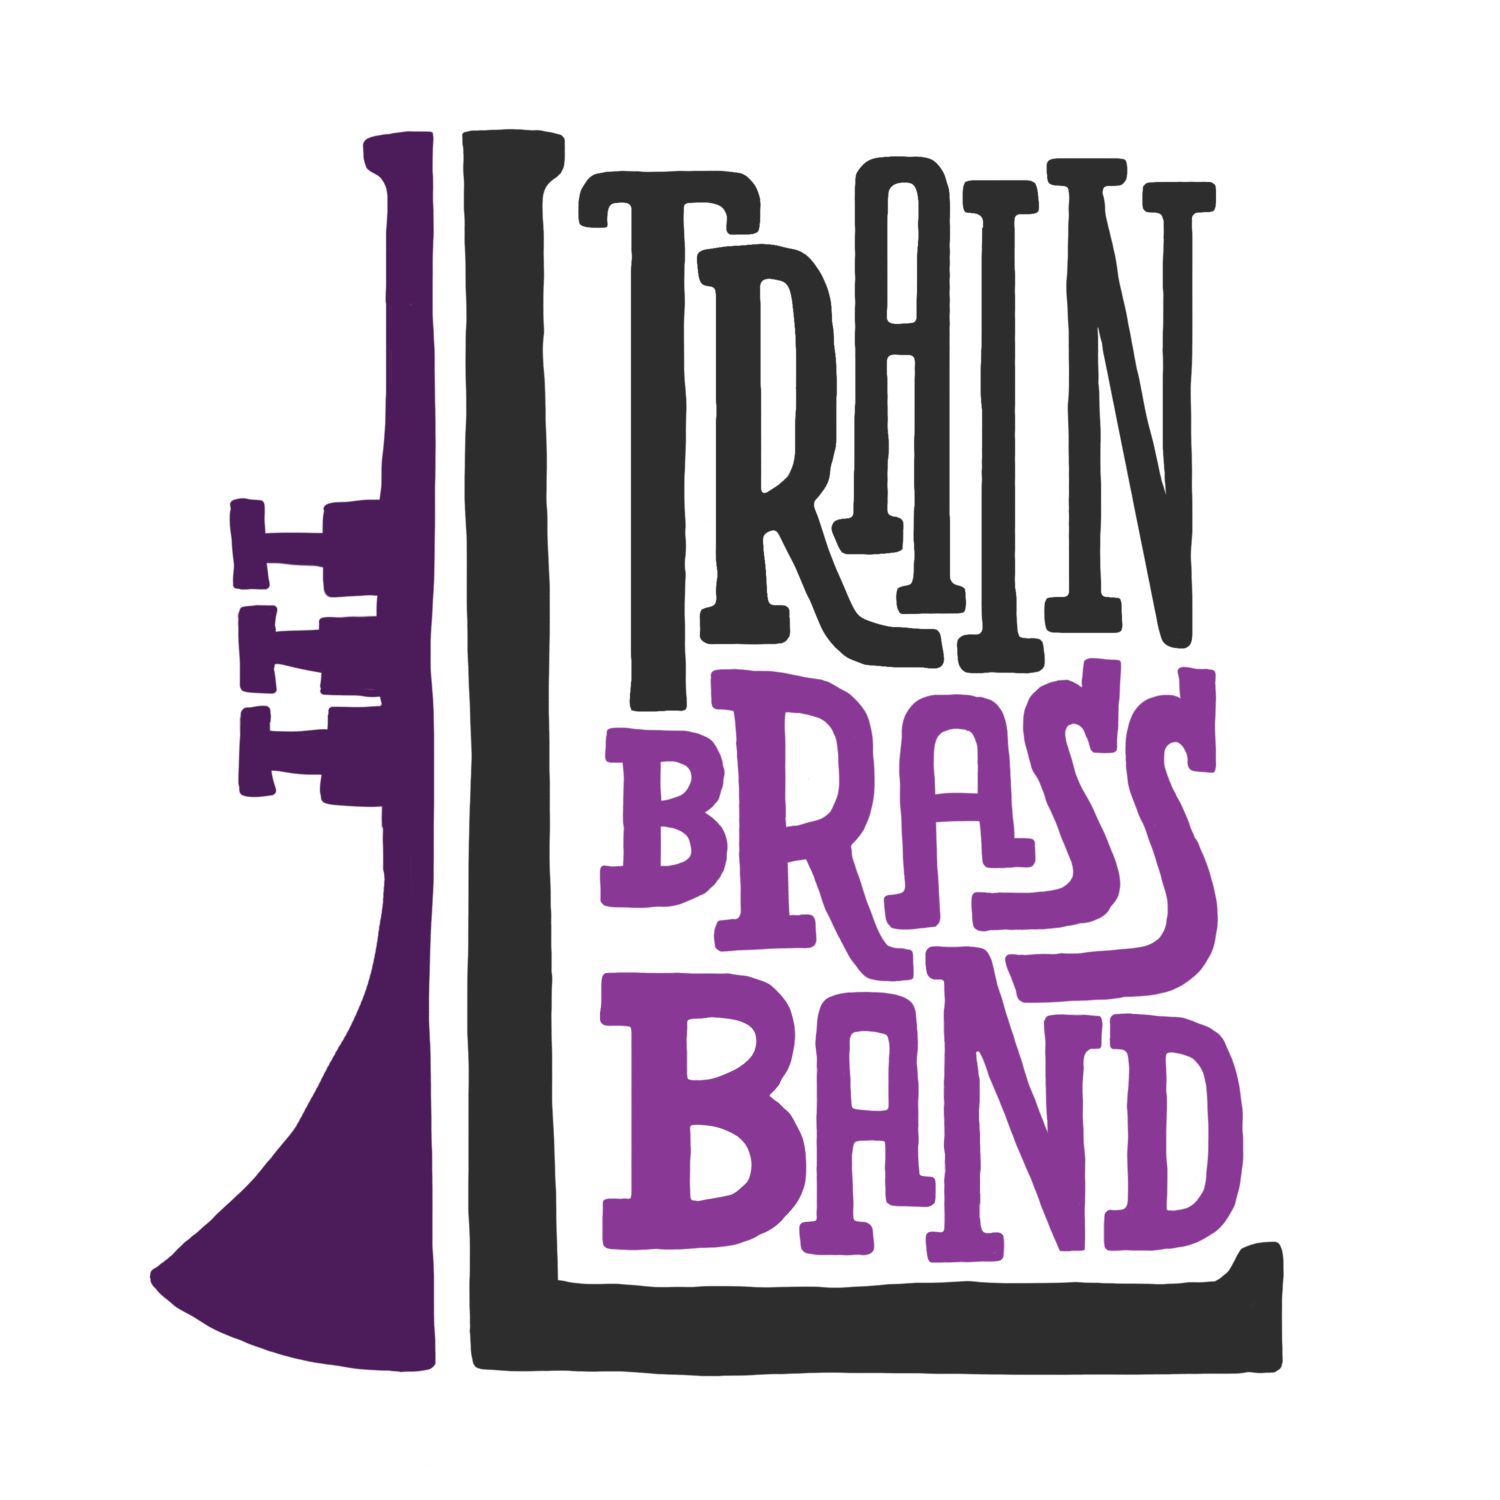 The L Train Brass Band